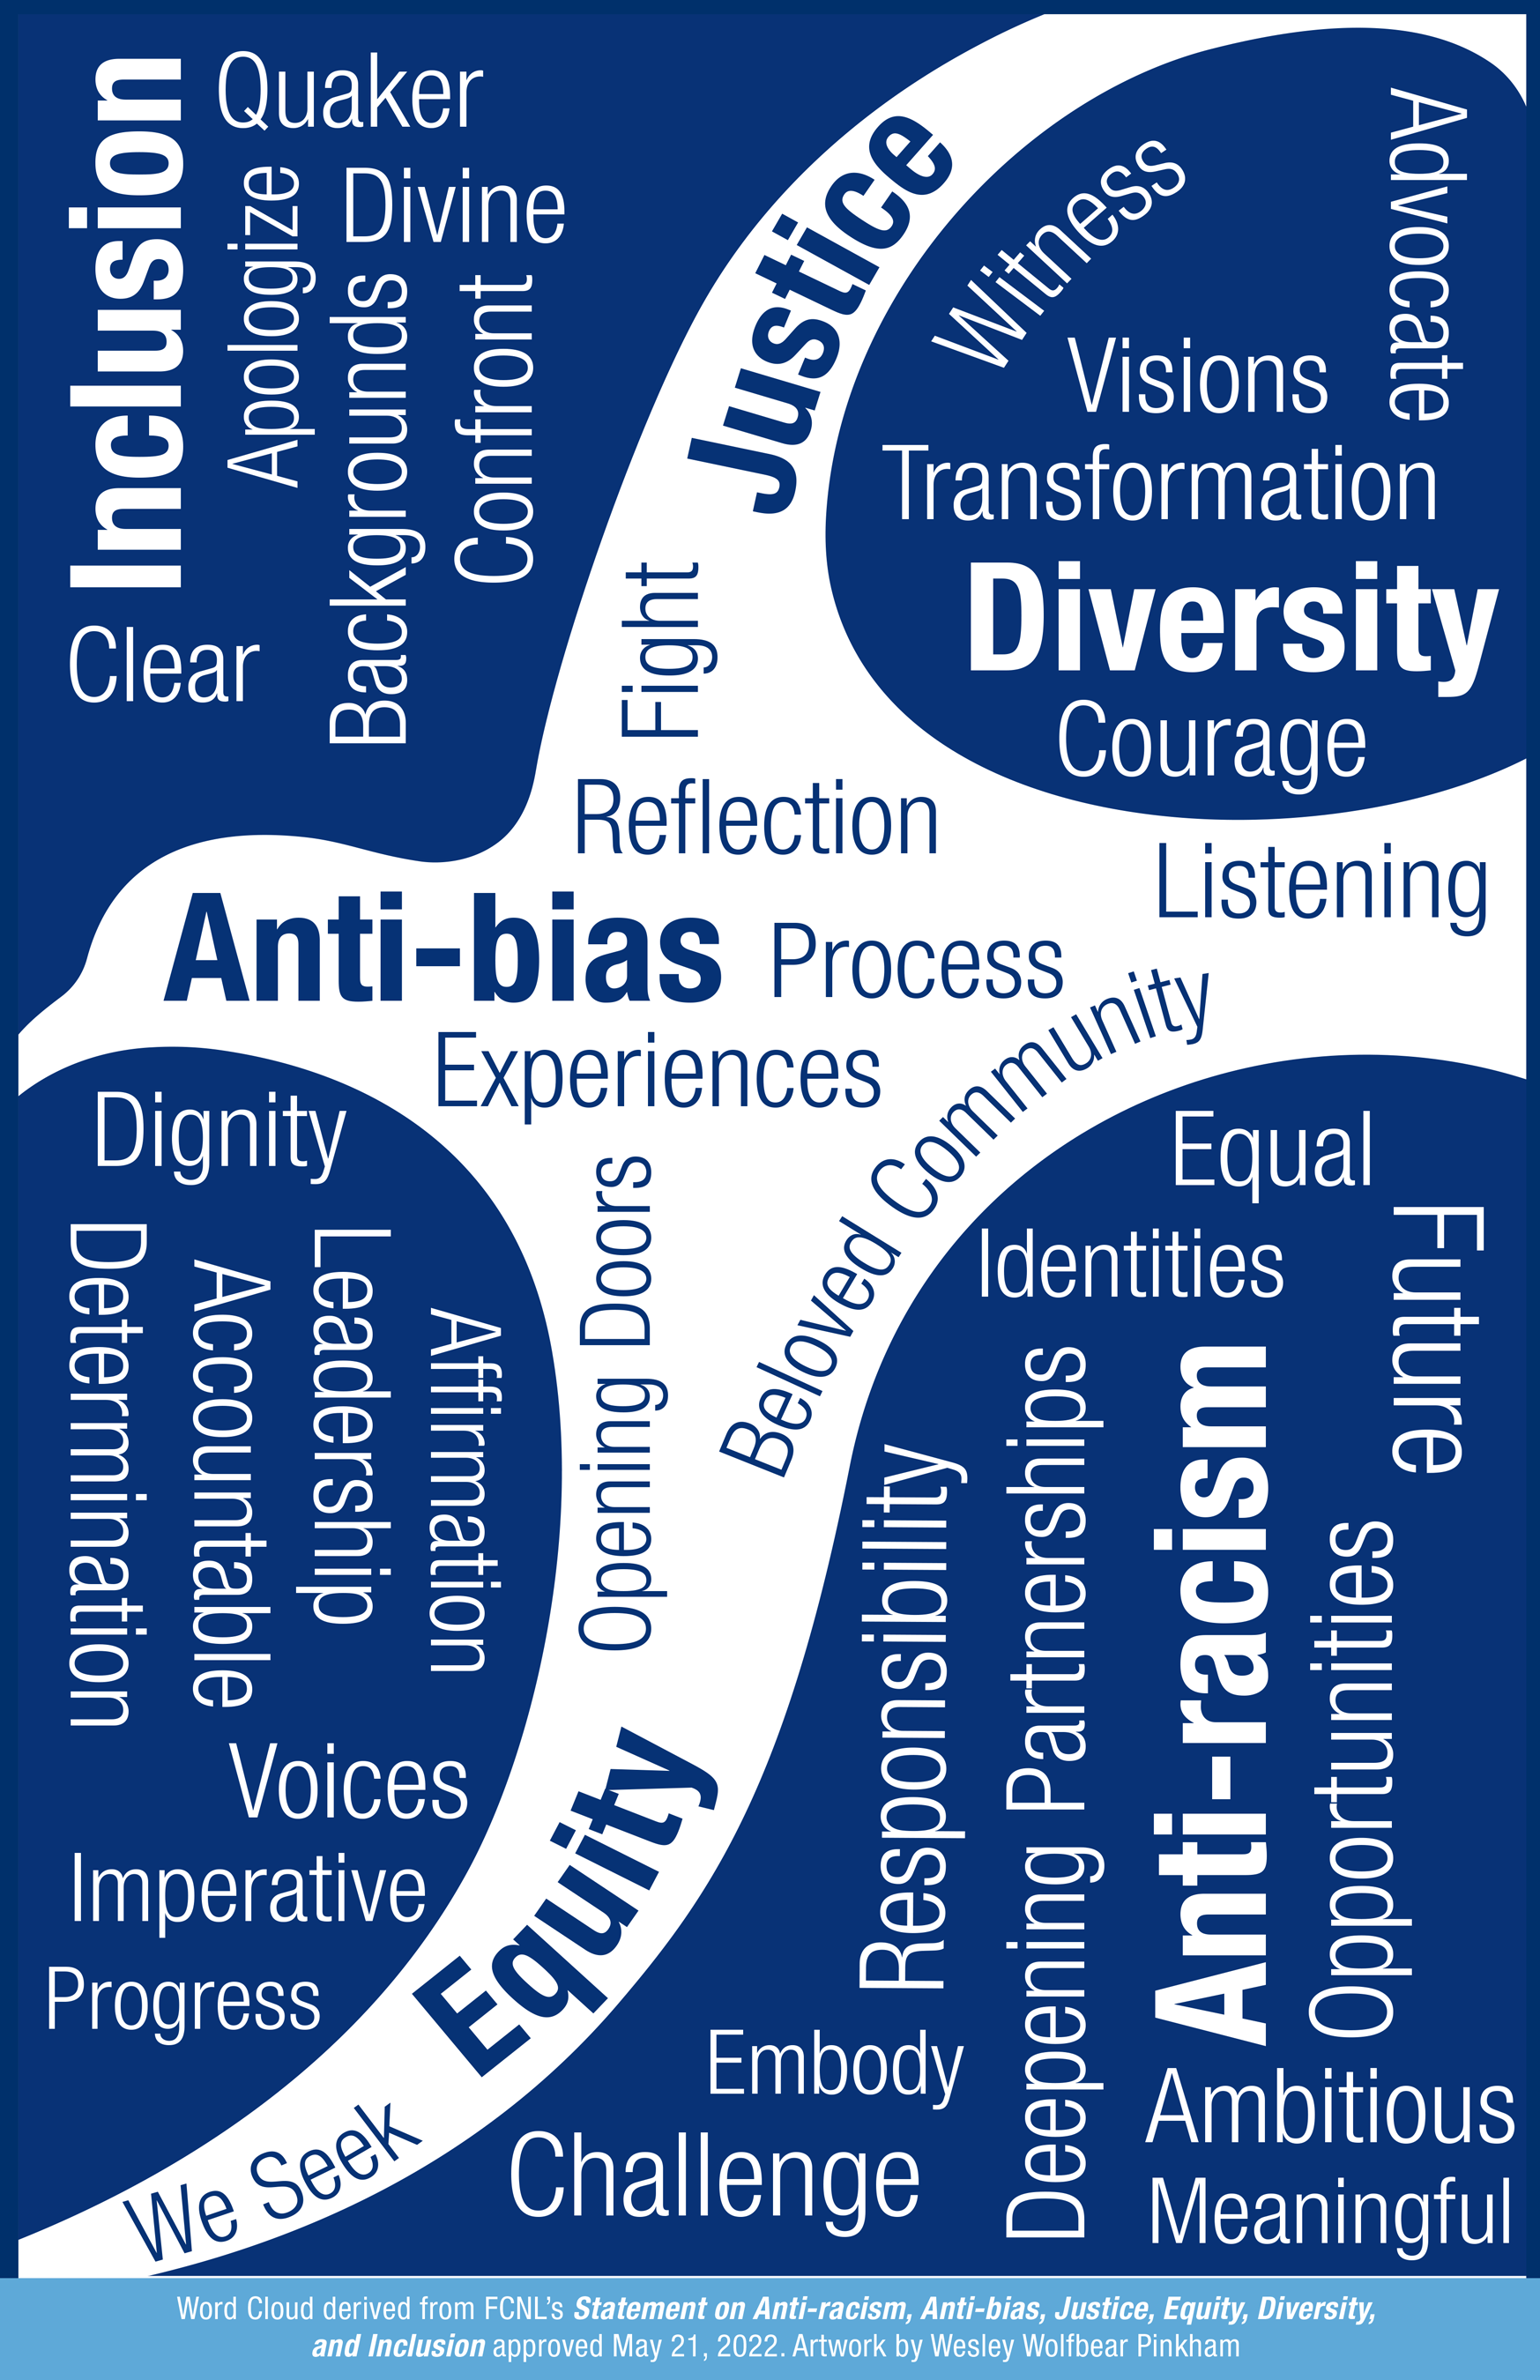 FCNL's Anti-racism, Anti-bias, Justice, Equity, Diversity, and Inclusion poster